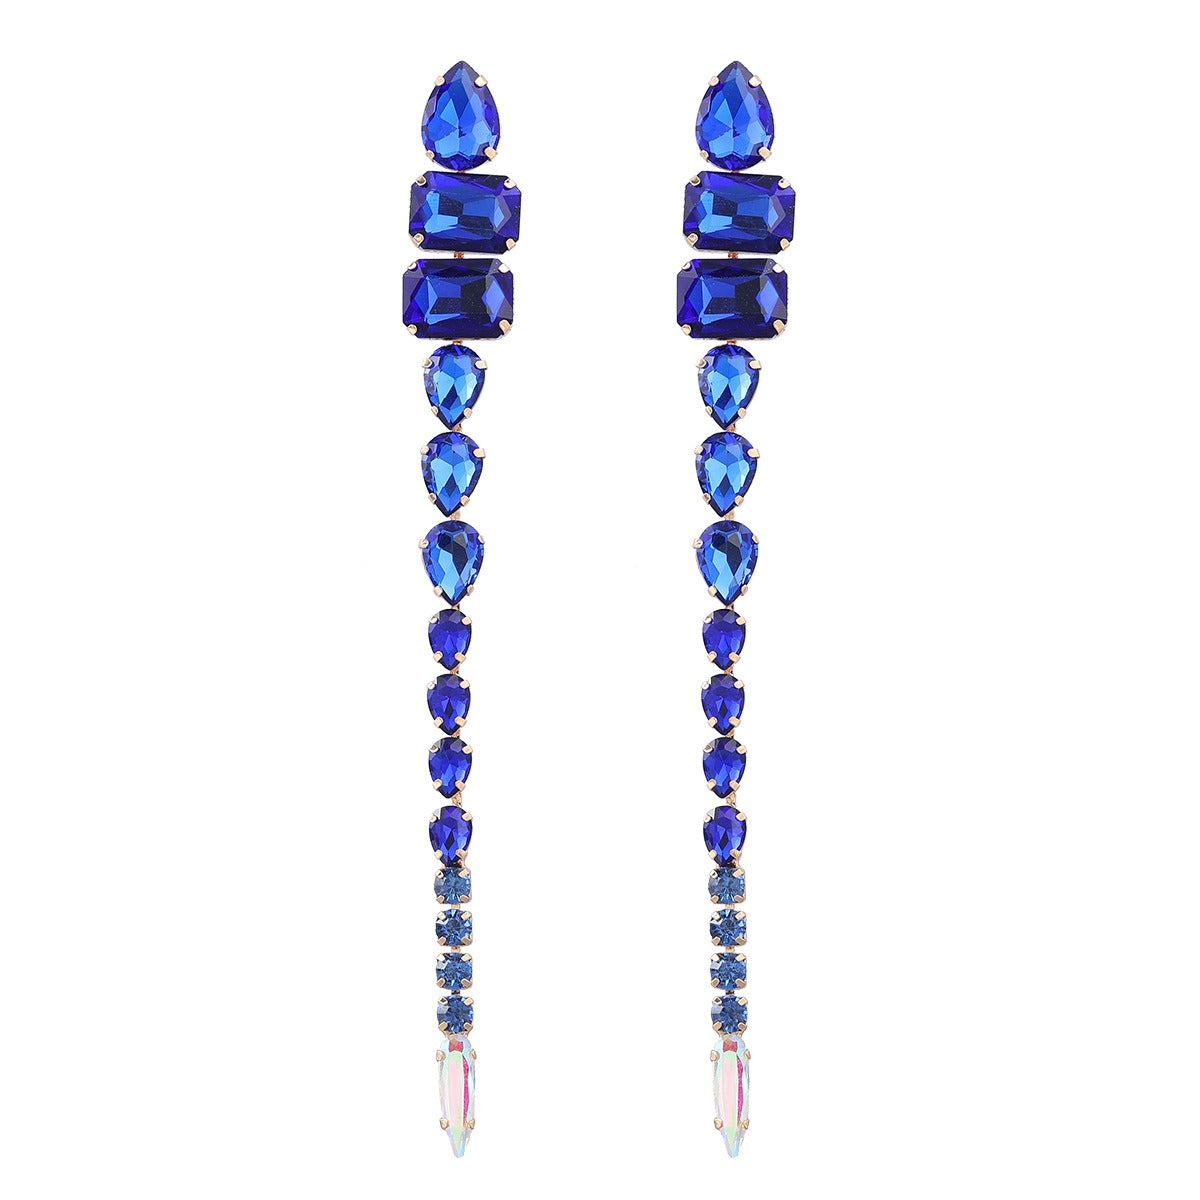 Super Flash Claw Chain Alloy Glass Diamond Long Exaggerated Earrings - DromedarShop.com Online Boutique